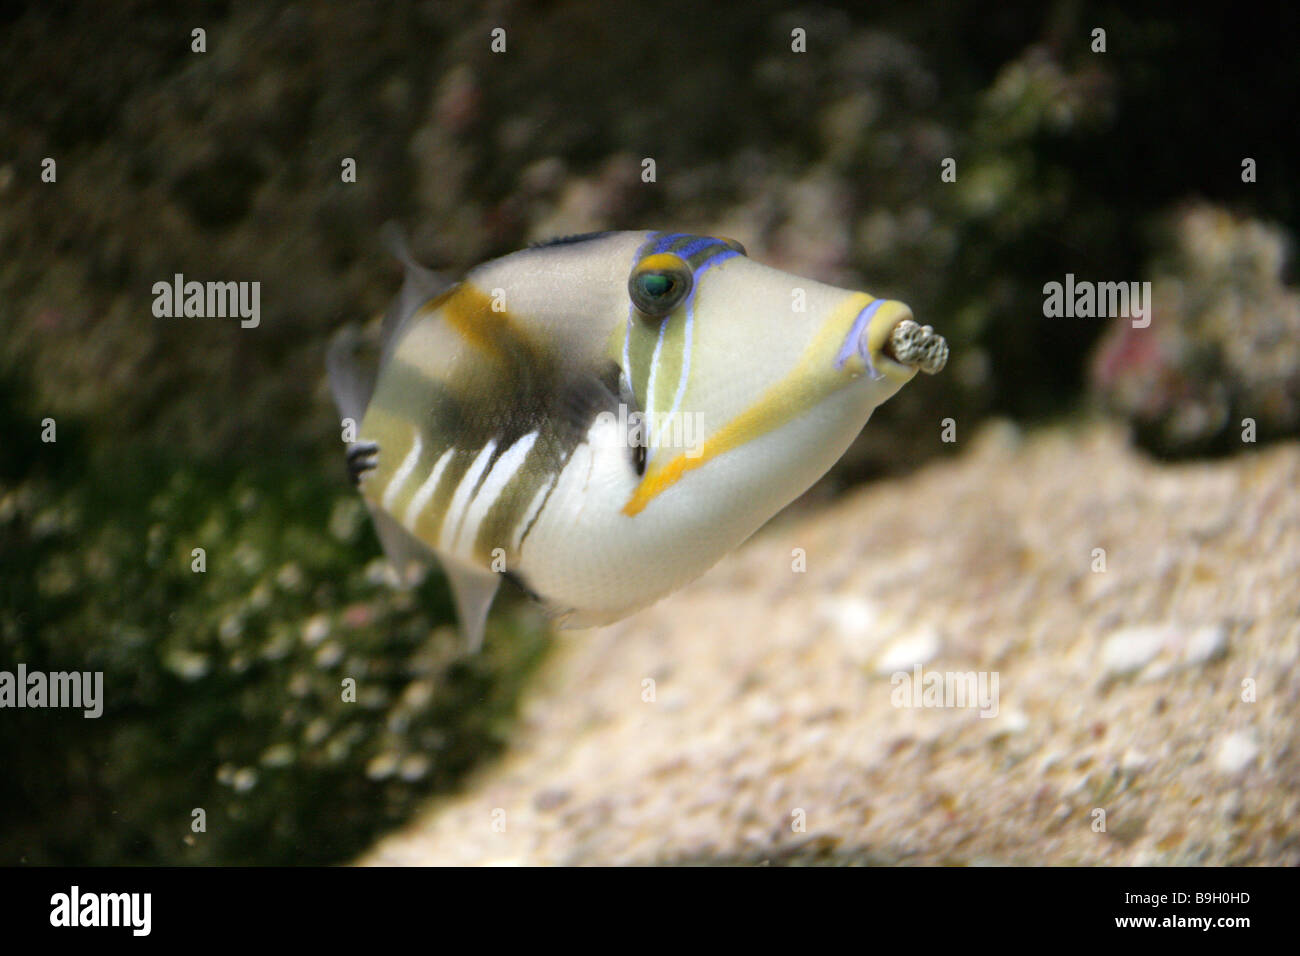 Picasso or Humu Triggerfish Rhinecanthus aculeatus Building a Nest with Small Pebbles Stock Photo